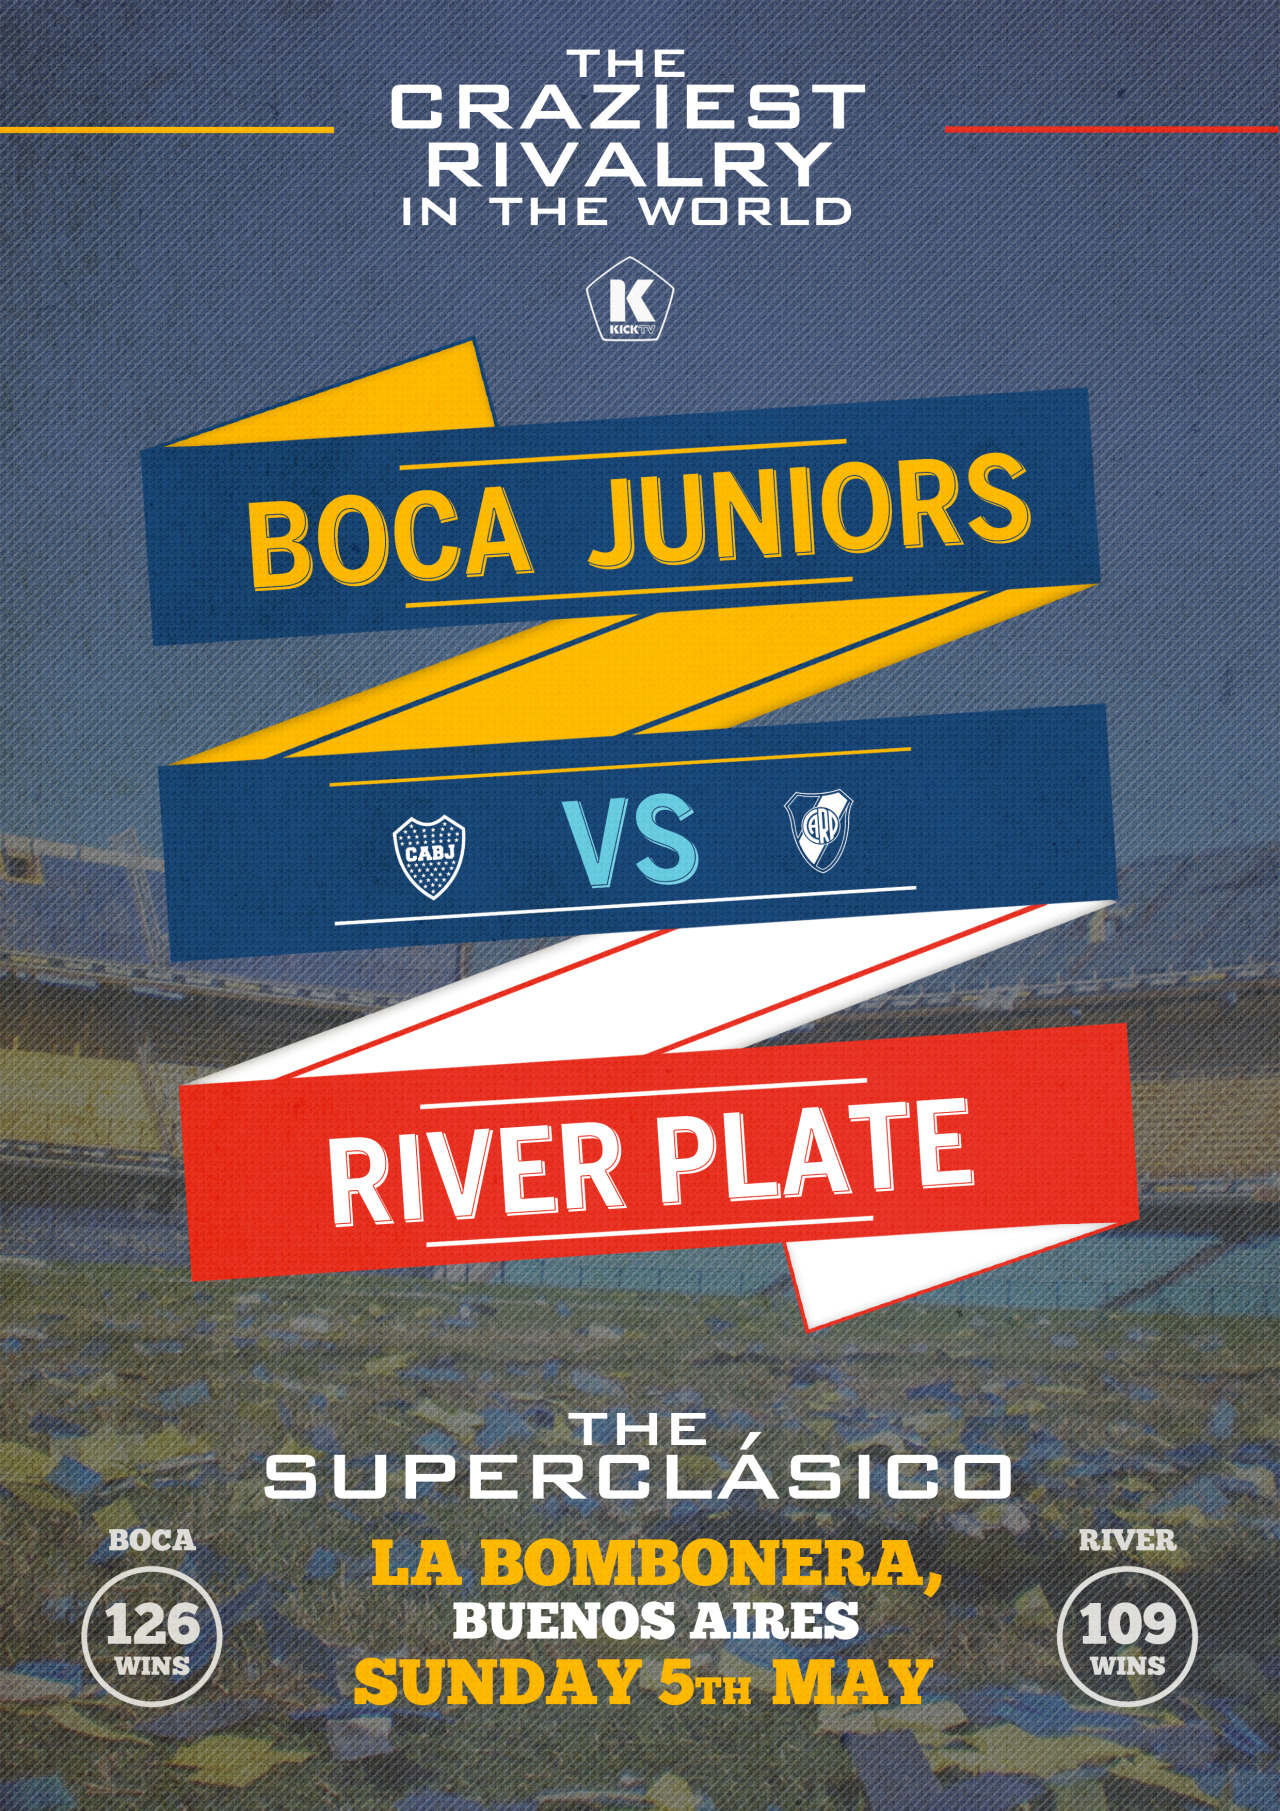 There’s nothing like the Superclásico This afternoon in Buenos Aires, Boca Juniors play River Plate at the infamous La Bombonera. Argentina stops and drapes itself in blue and yellow or red and white. Buenos Aires beats to the drum of the two...